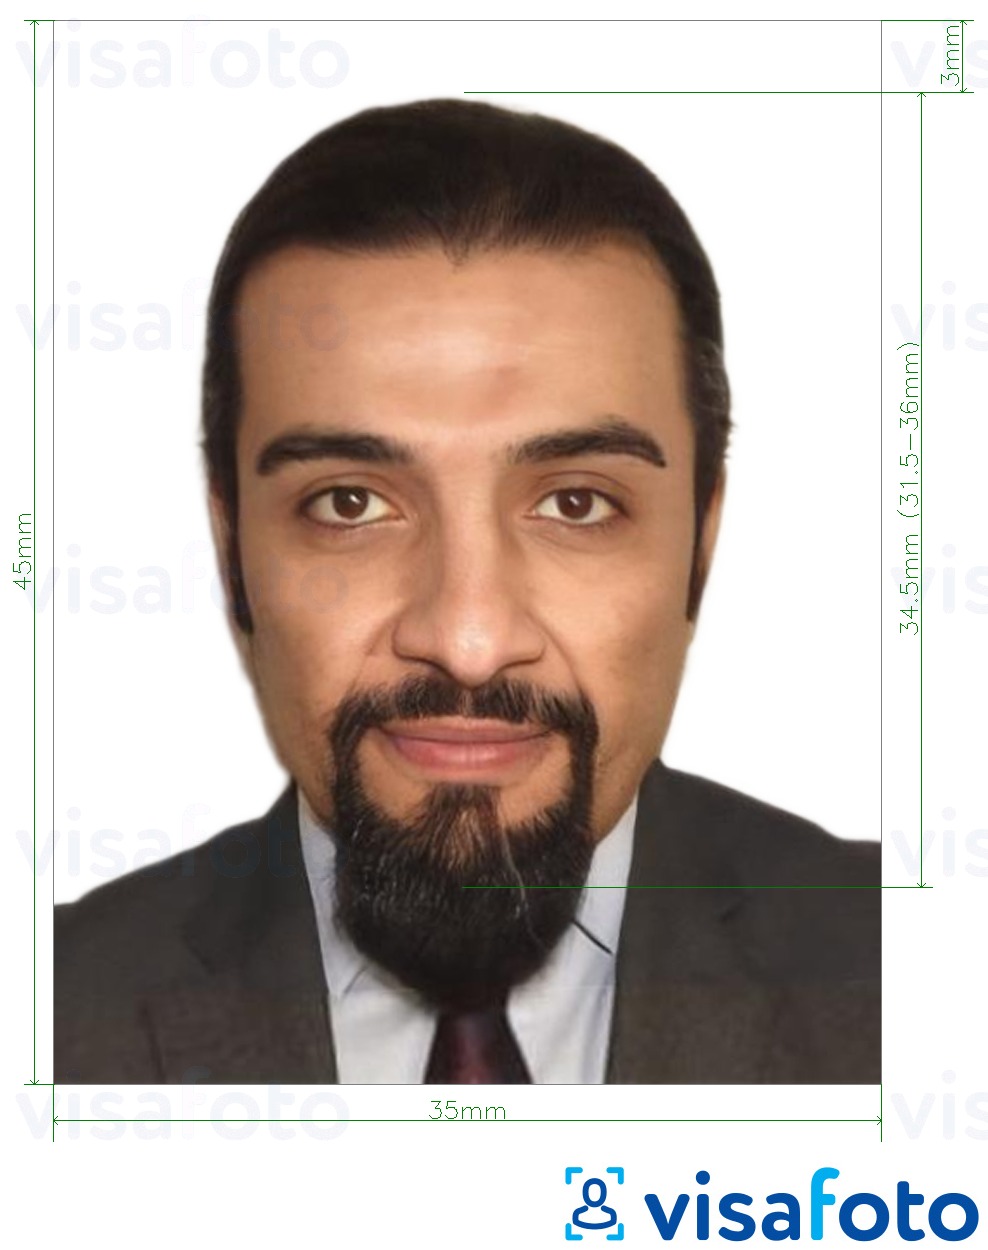 Example of photo for Iraq passport 35x45 mm (3.5x4.5 cm) with exact size specification